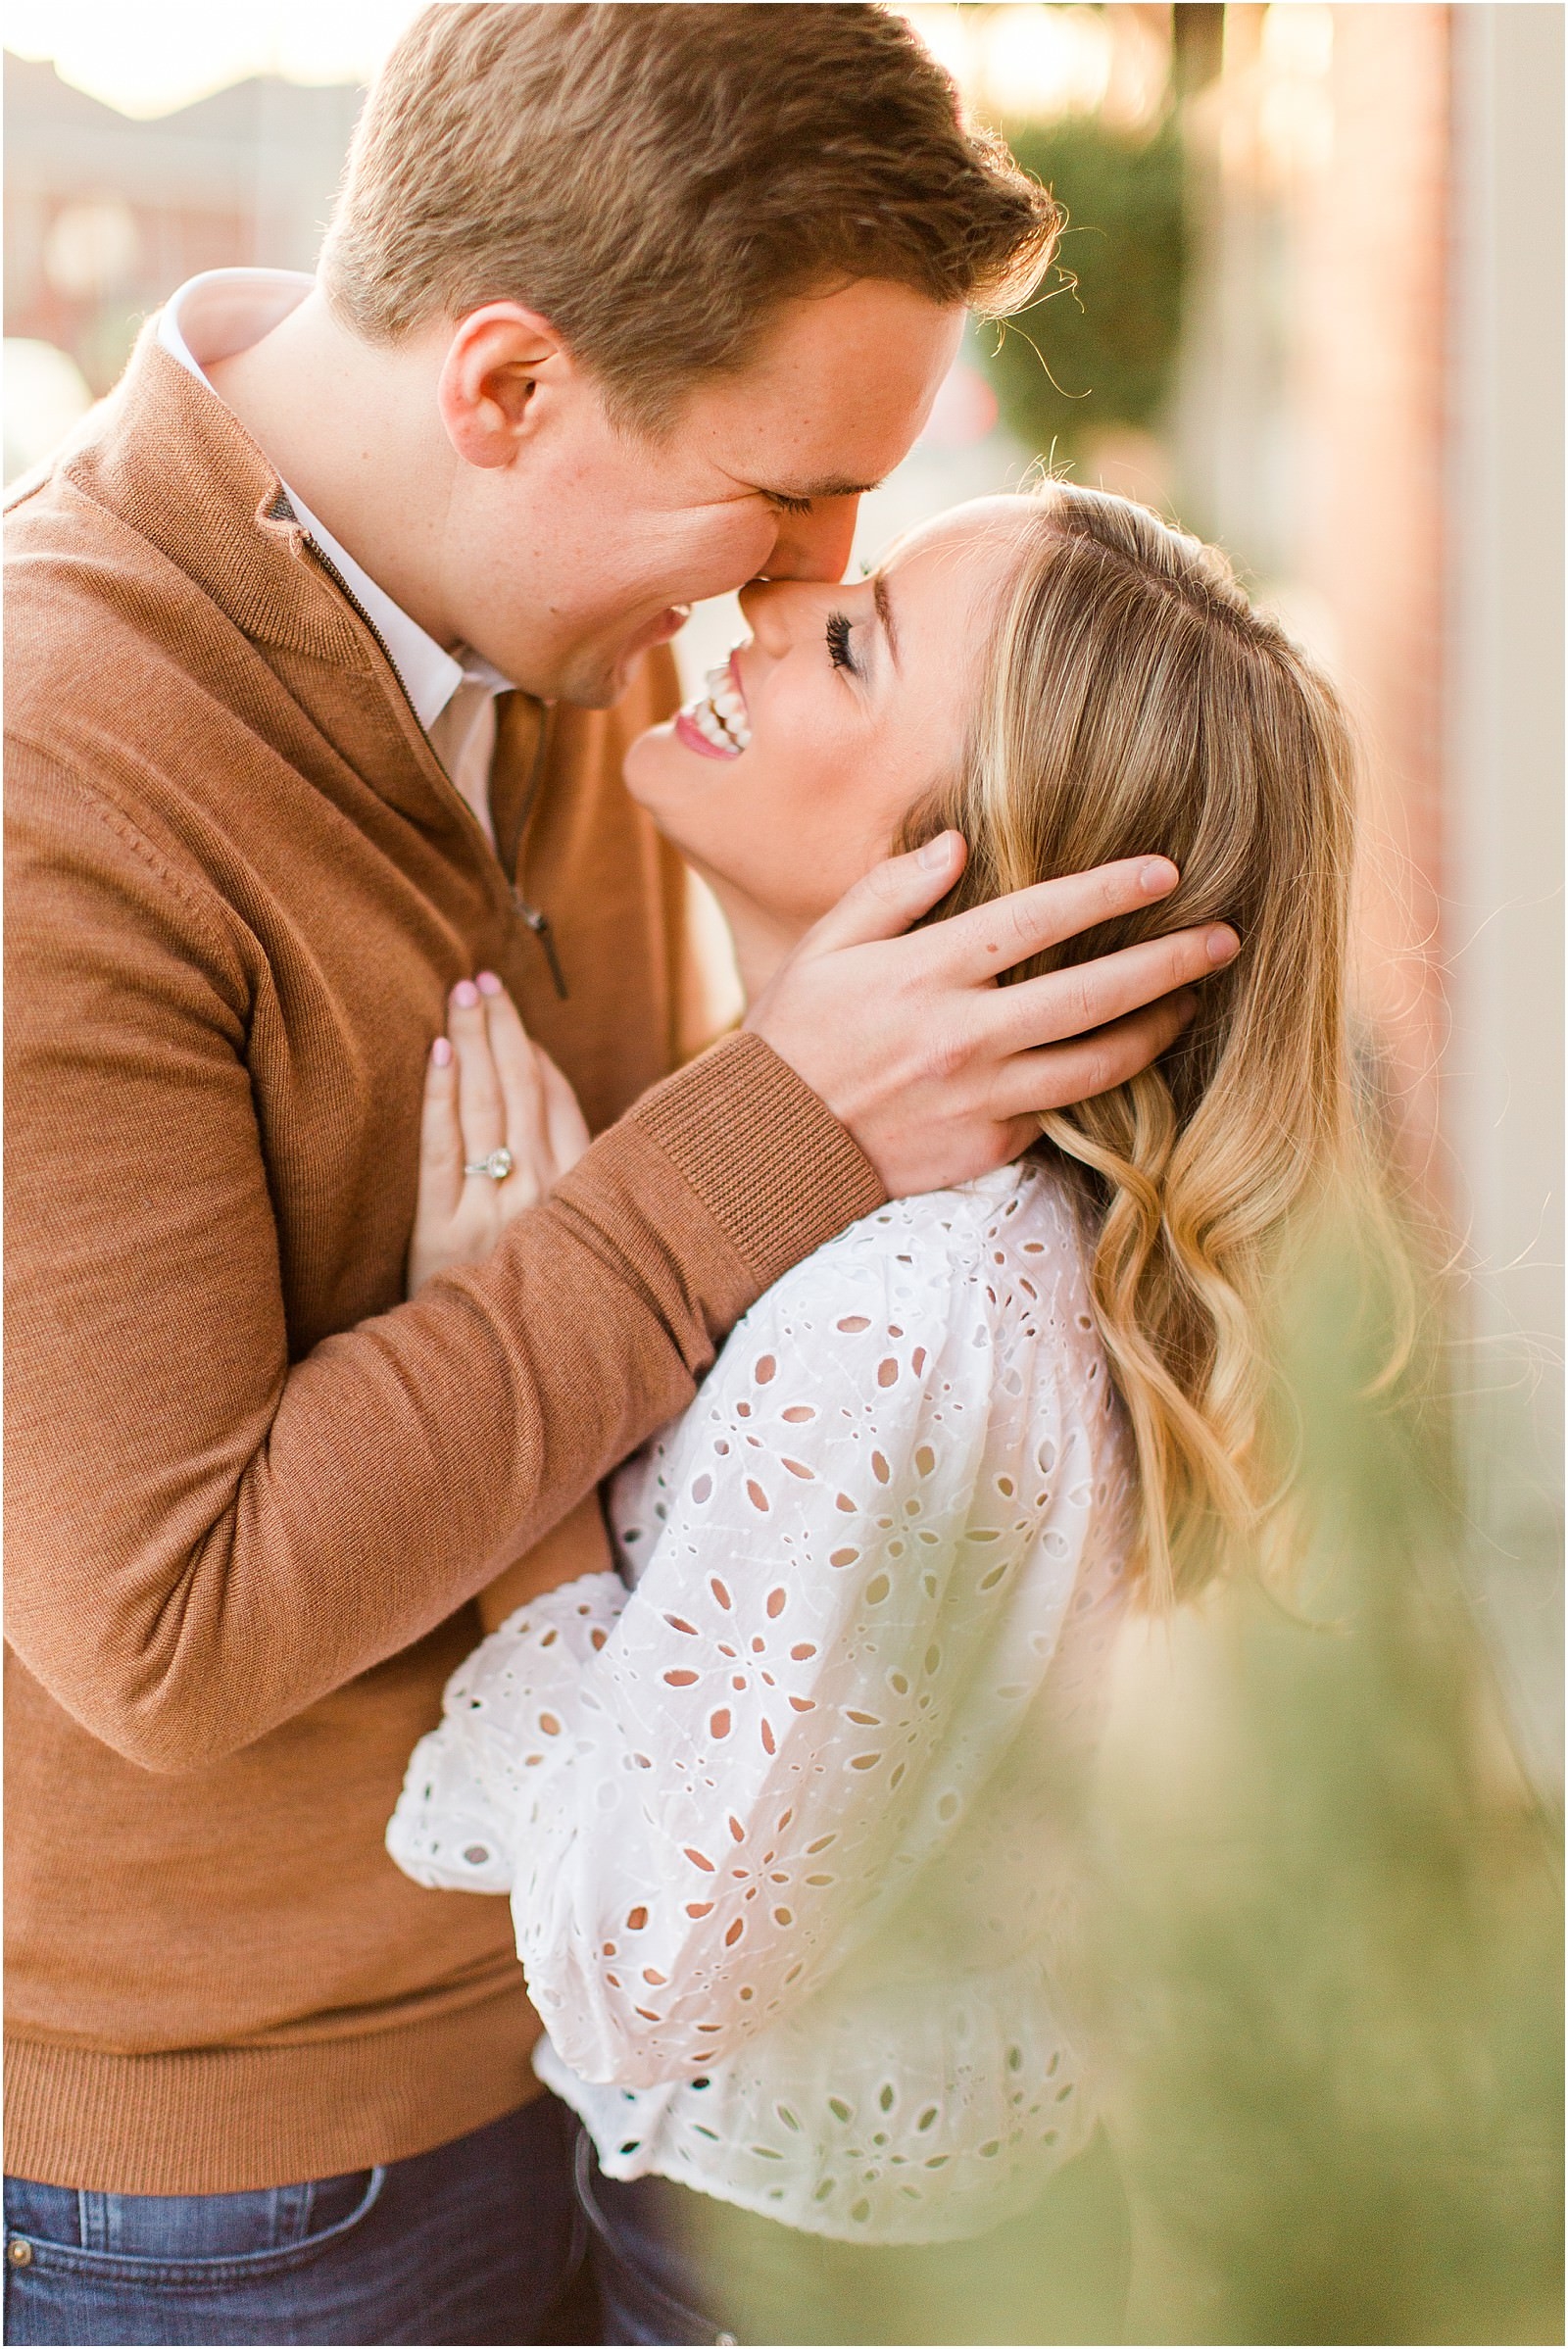 Madison and Christaan | A 20 West Engagement Session in Downto wn Newburgh | Bret and Brandie Photography046.jpg